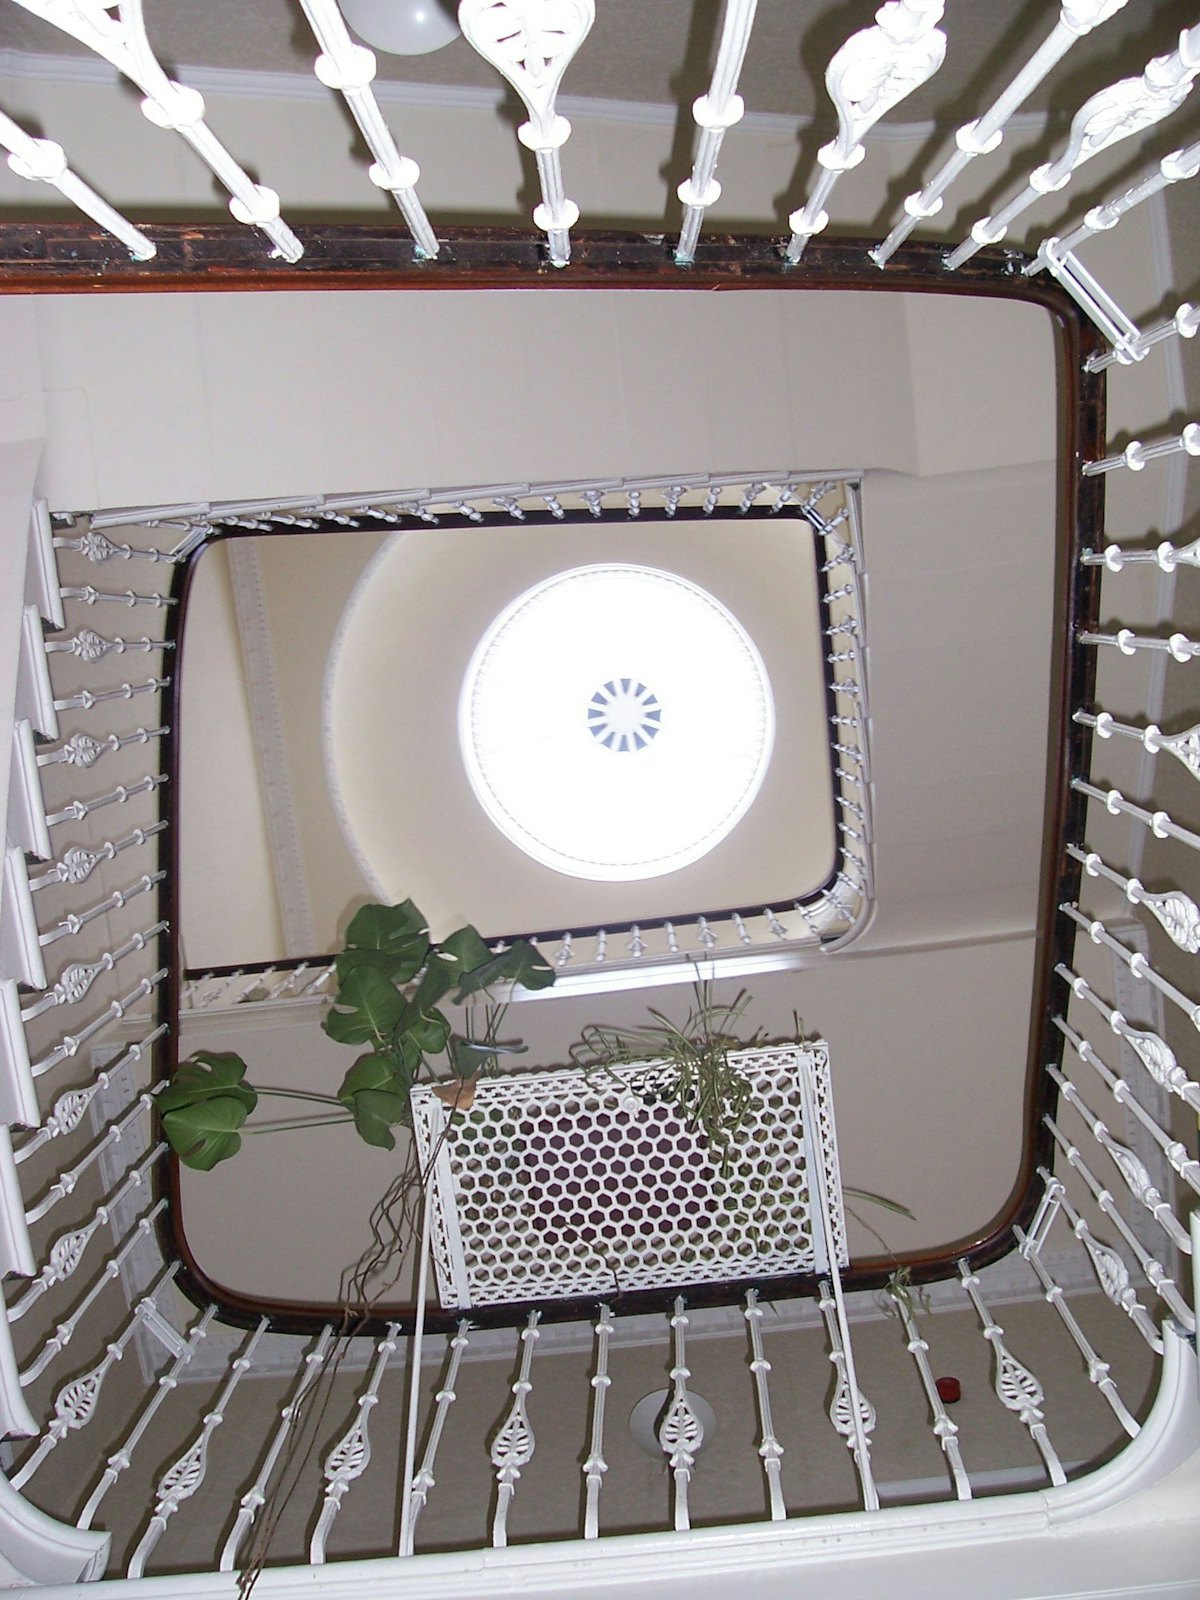 View from below of the staircase and cupola in the new Baha'i center in Edinburgh.